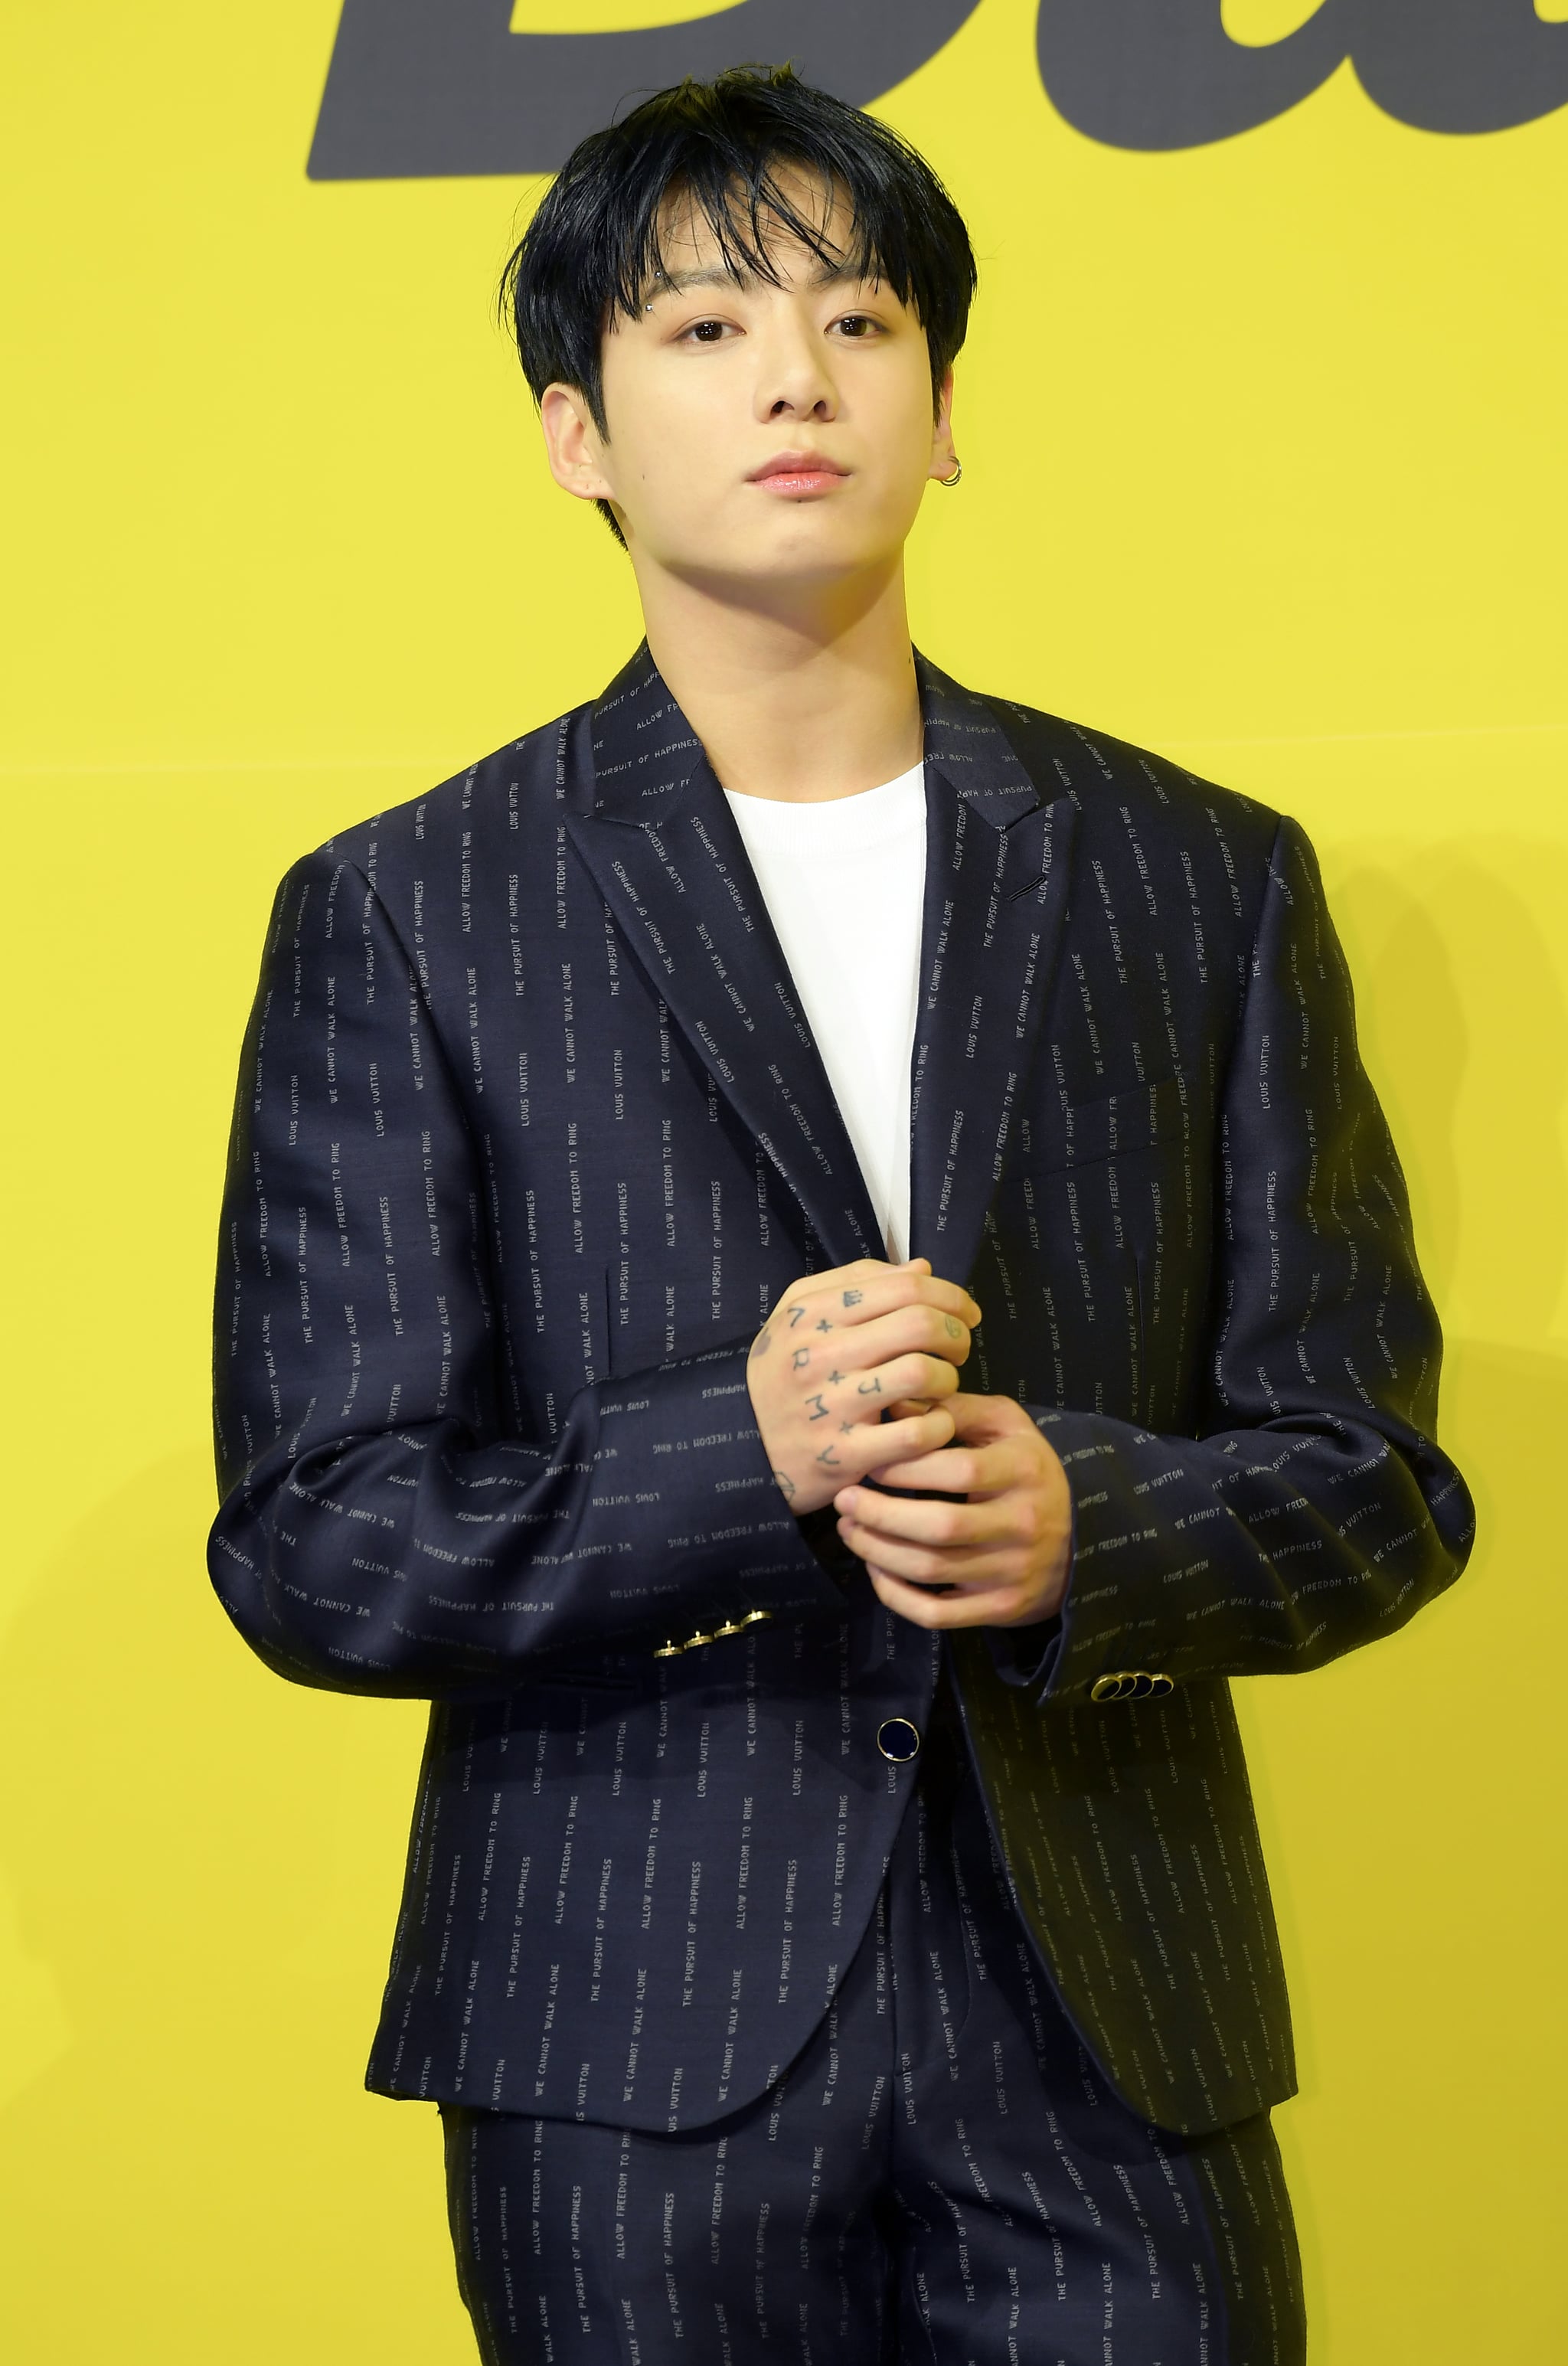 SEOUL, SOUTH KOREA - MAY 21: Jungkook of BTS attends a press conference for BTS's new digital single 'Butter' at Olympic Hall on May 21, 2021 in Seoul, South Korea. (Photo by The Chosunilbo JNS/Imazins via Getty Images)